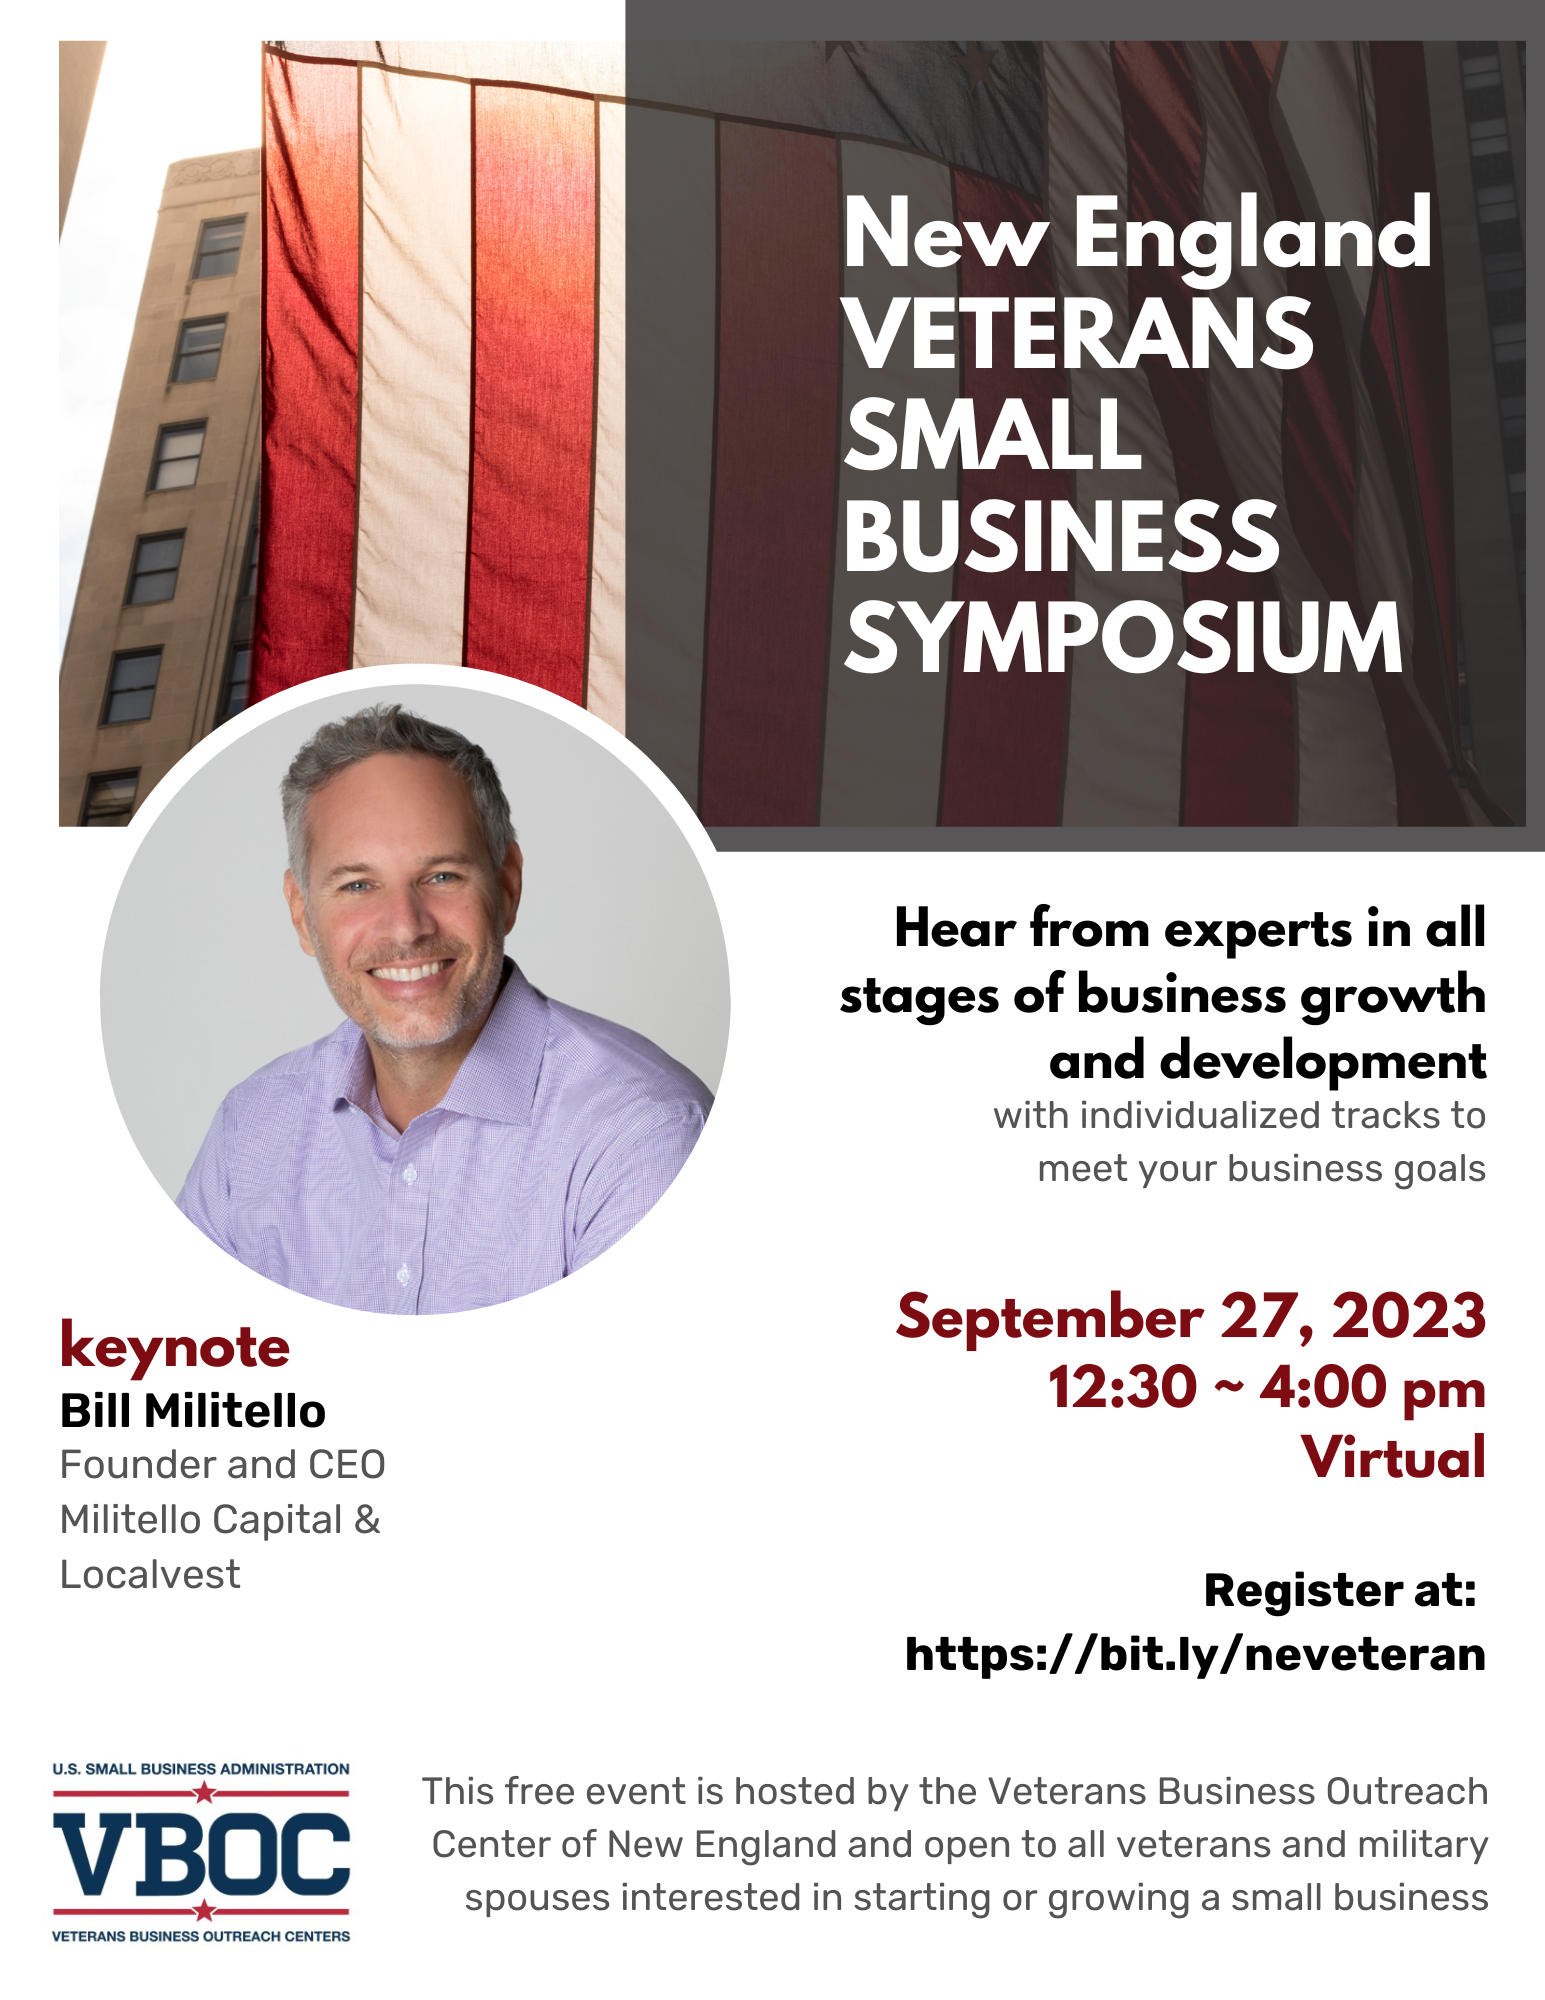 New England Veterans Small Business Symposium @ Online event